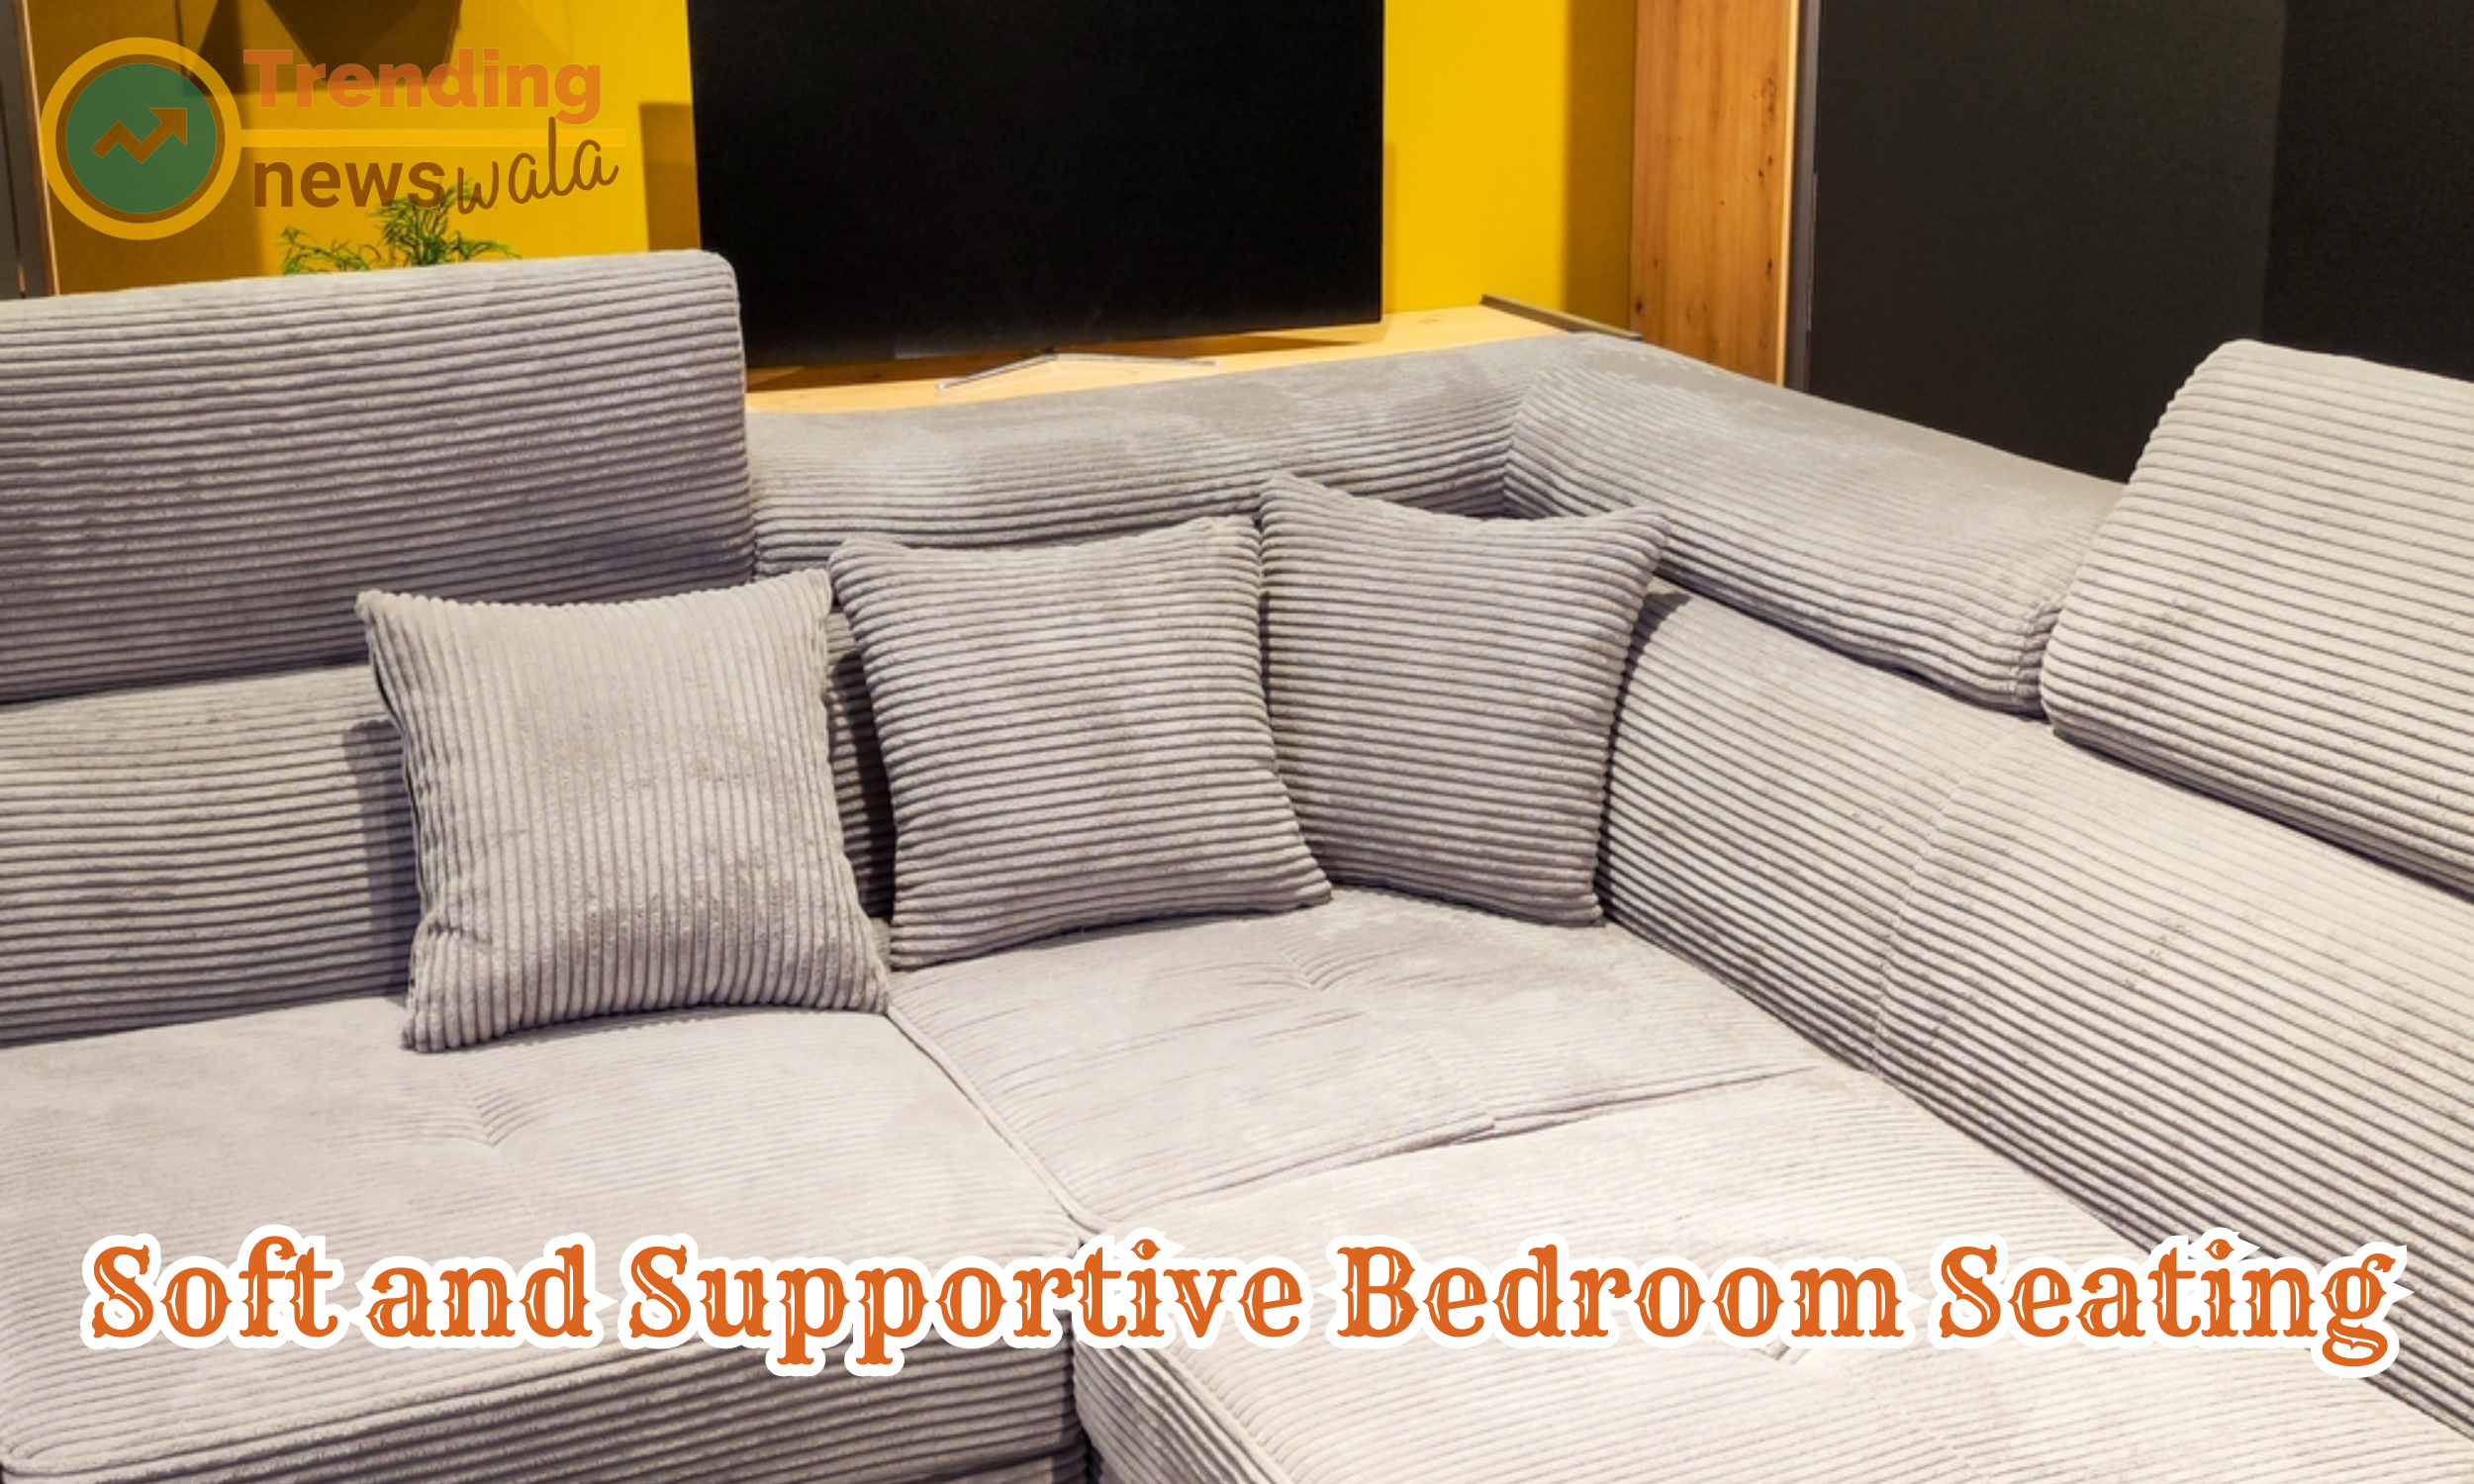 When it comes to creating a comfortable and inviting bedroom, soft and supportive seating